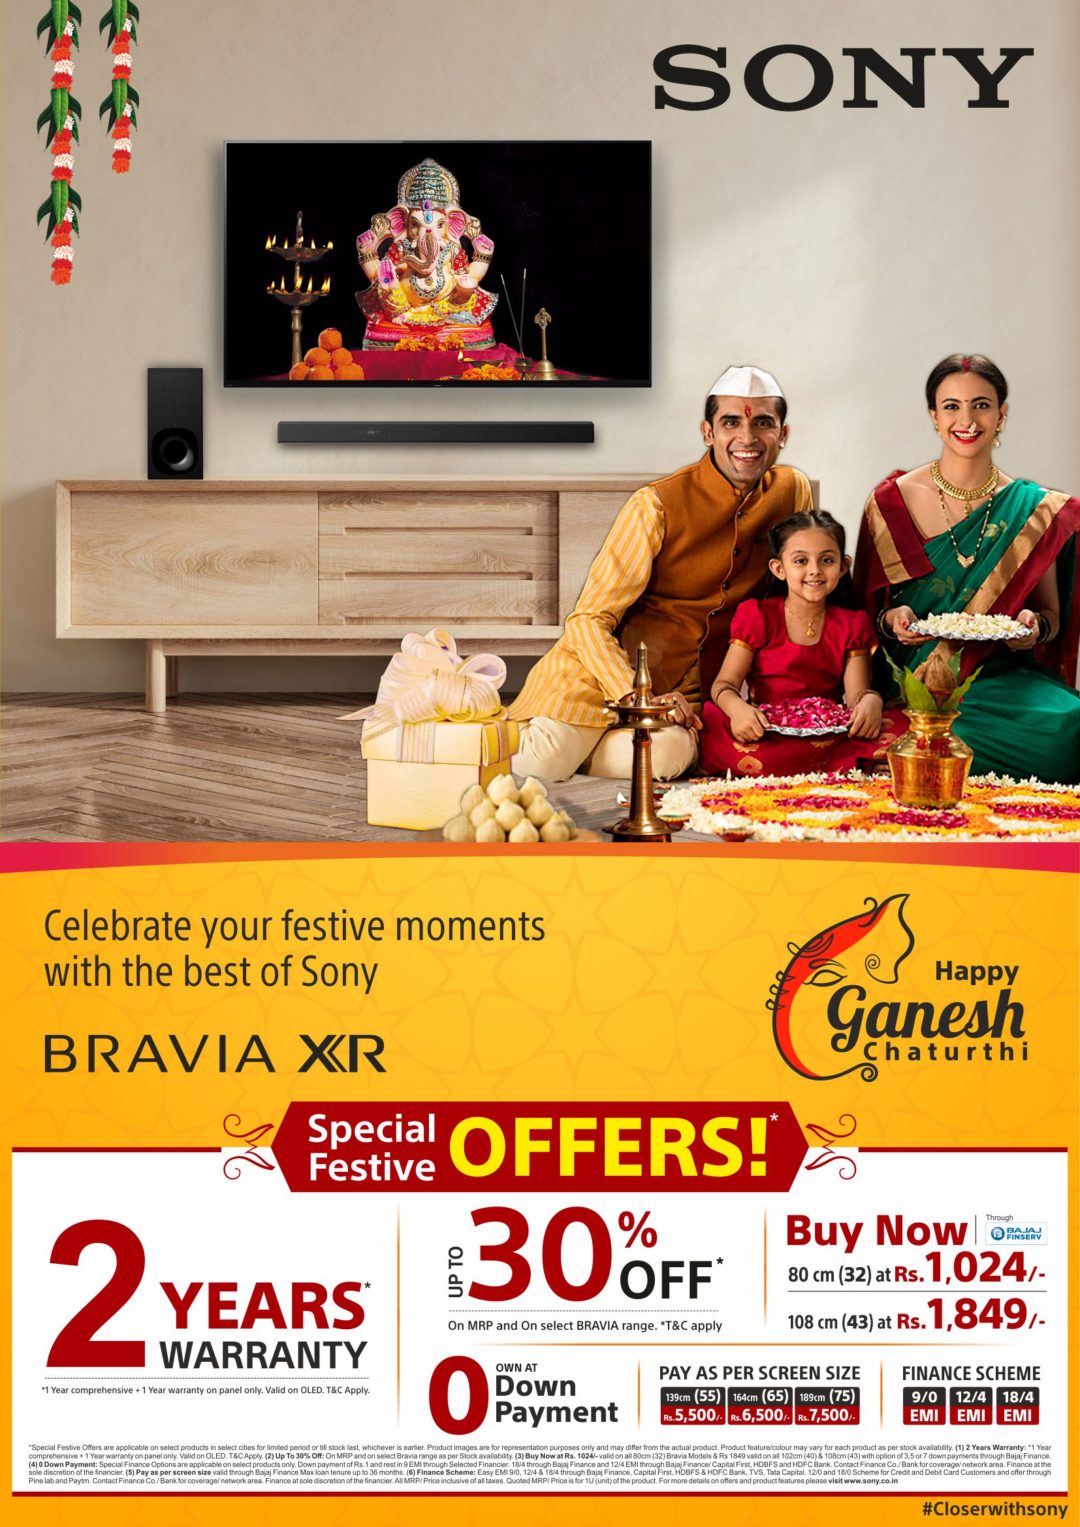 ⦁ Get the best home entertainment experience with amazing 30% discount along with easy EMIs starting Rs. 1,024/- and 2 years warranty on OLED televisions To cater to an upsurge in demand for large screen televisions with the latest technology, Sony India has announced an exciting discount of up to 30% on MRP on select BRAVIA televisions along with 2 years warranty (1 year comprehensive + 1 year on Panel only) on BRAVIA OLED televisions. Keeping the ease of buying in mind, Sony has launched an EMI scheme starting from Rs.1024/- so that customers can upgrade their experience to the new range BRAVIA televisions with XR Cognitive Processor, Google TV, Dolby Vision, Dolby Atmos and 4K 120fps. ⦁ Enjoy discount of Rs. 20,000/- on the purchase of select Full-Frame camera body along with lens, get Pro-Style camera backpack free with A7SIII and B&W Type 6600 carry case free with FX6 Cinema Line camera and avail extended 2+1 years warranty. Customers can now save Rs. 20,000/- on the purchase of select Full-Frame camera body along with lens. Get Pro-Style camera backpack worth Rs. 9,990/- free on the purchase of A7S III Full-Frame mirrorless camera and a B&W Type 6600 carry case worth Rs. 22,990/- free with FX6 Cinema Line camera, which have industry-leading digital cinema technology with advanced imaging. Additionally, Sony is offering 2+1-year warranty on the purchase of select camera models. ⦁ ‘Create Your Own Cinema at Home’ with attractive soundbar combo offers With a wide range of Sony Soundbars to choose from, customers can now create true cinematic experience right in the comfort of their homes. Customers can save up to Rs. 10,000 on purchase of soundbar with a BRAVIA television from 102 cm (40) and above. ⦁ Save up to Rs.7,000 on purchase of the new ‘X Series’ portable wireless Speaker Customer can now save up to Rs.7000/- with all new X-Series range of the speakers are specially designed to provide a powerful and wide-spread sound to compliment any genre of music. Whether you are listening by yourself or with a group of friends, the new X-Series speakers match everyone’s style. You can choose a speaker that perfectly suits you with a wide range of choices on sound quality, portability, durability and lighting. ⦁ Avail easy finance offers during this festive season Enjoy easy EMI of 9/0, 12/4 and 18/4 and avail easy finance schemes with no processing fees with select partners. These special offers are valid from August 27, 2021 and will continue till September 19, 2021.